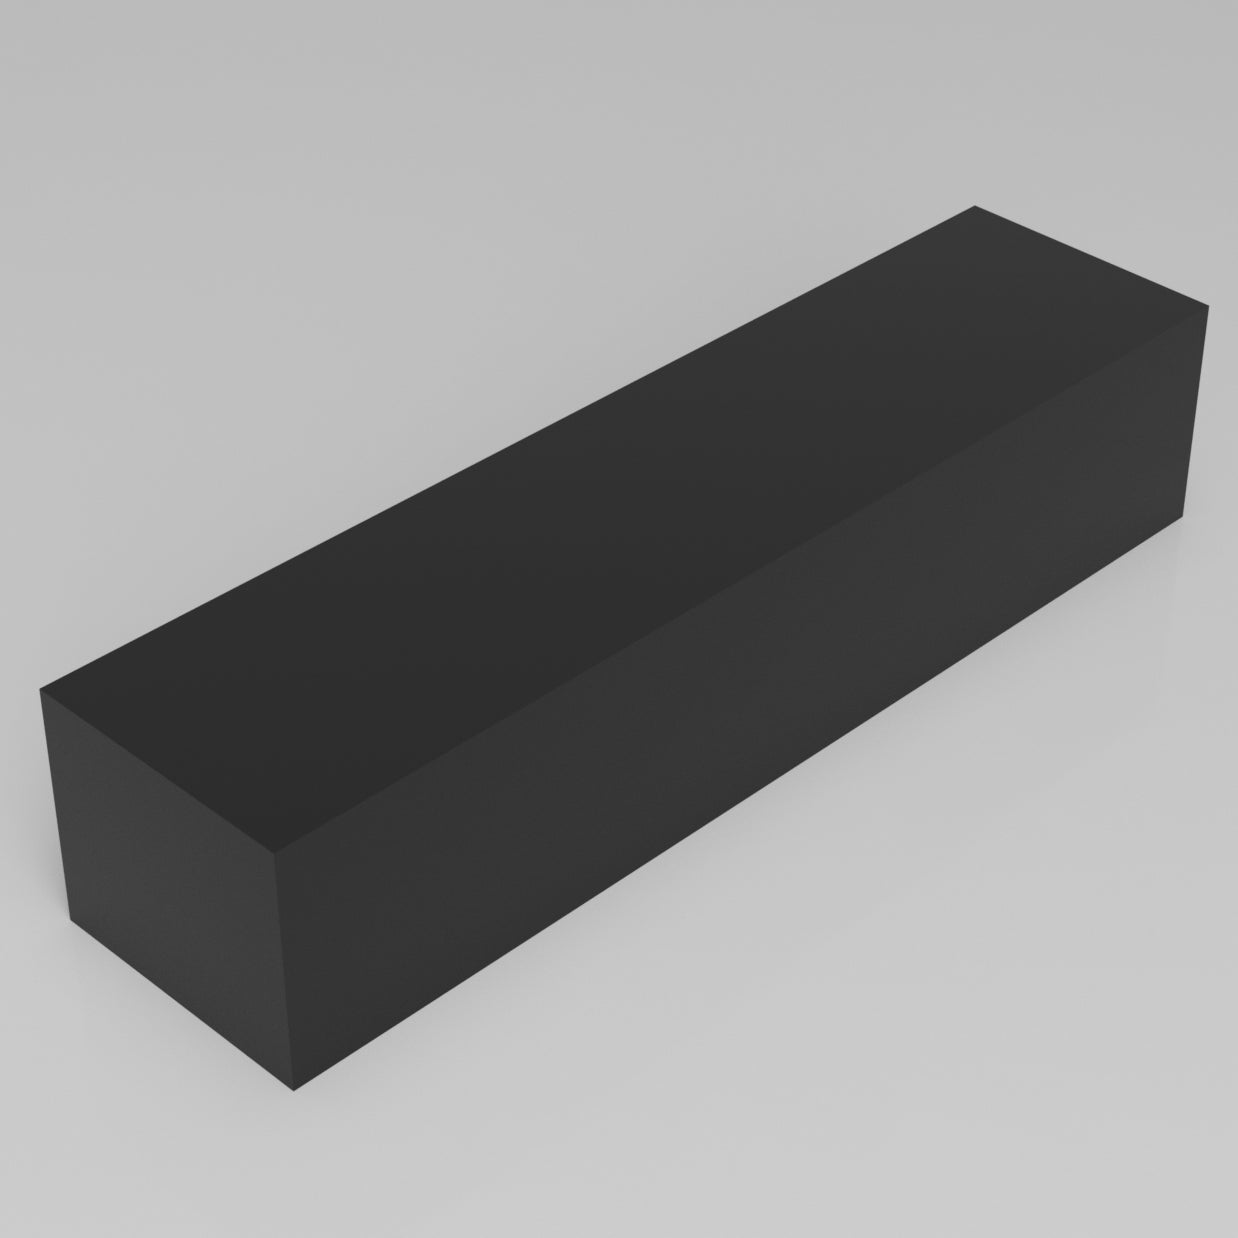 Machinable Wax Rectangular Block Front View 5 Inch by 6 Inch by 24 Inch